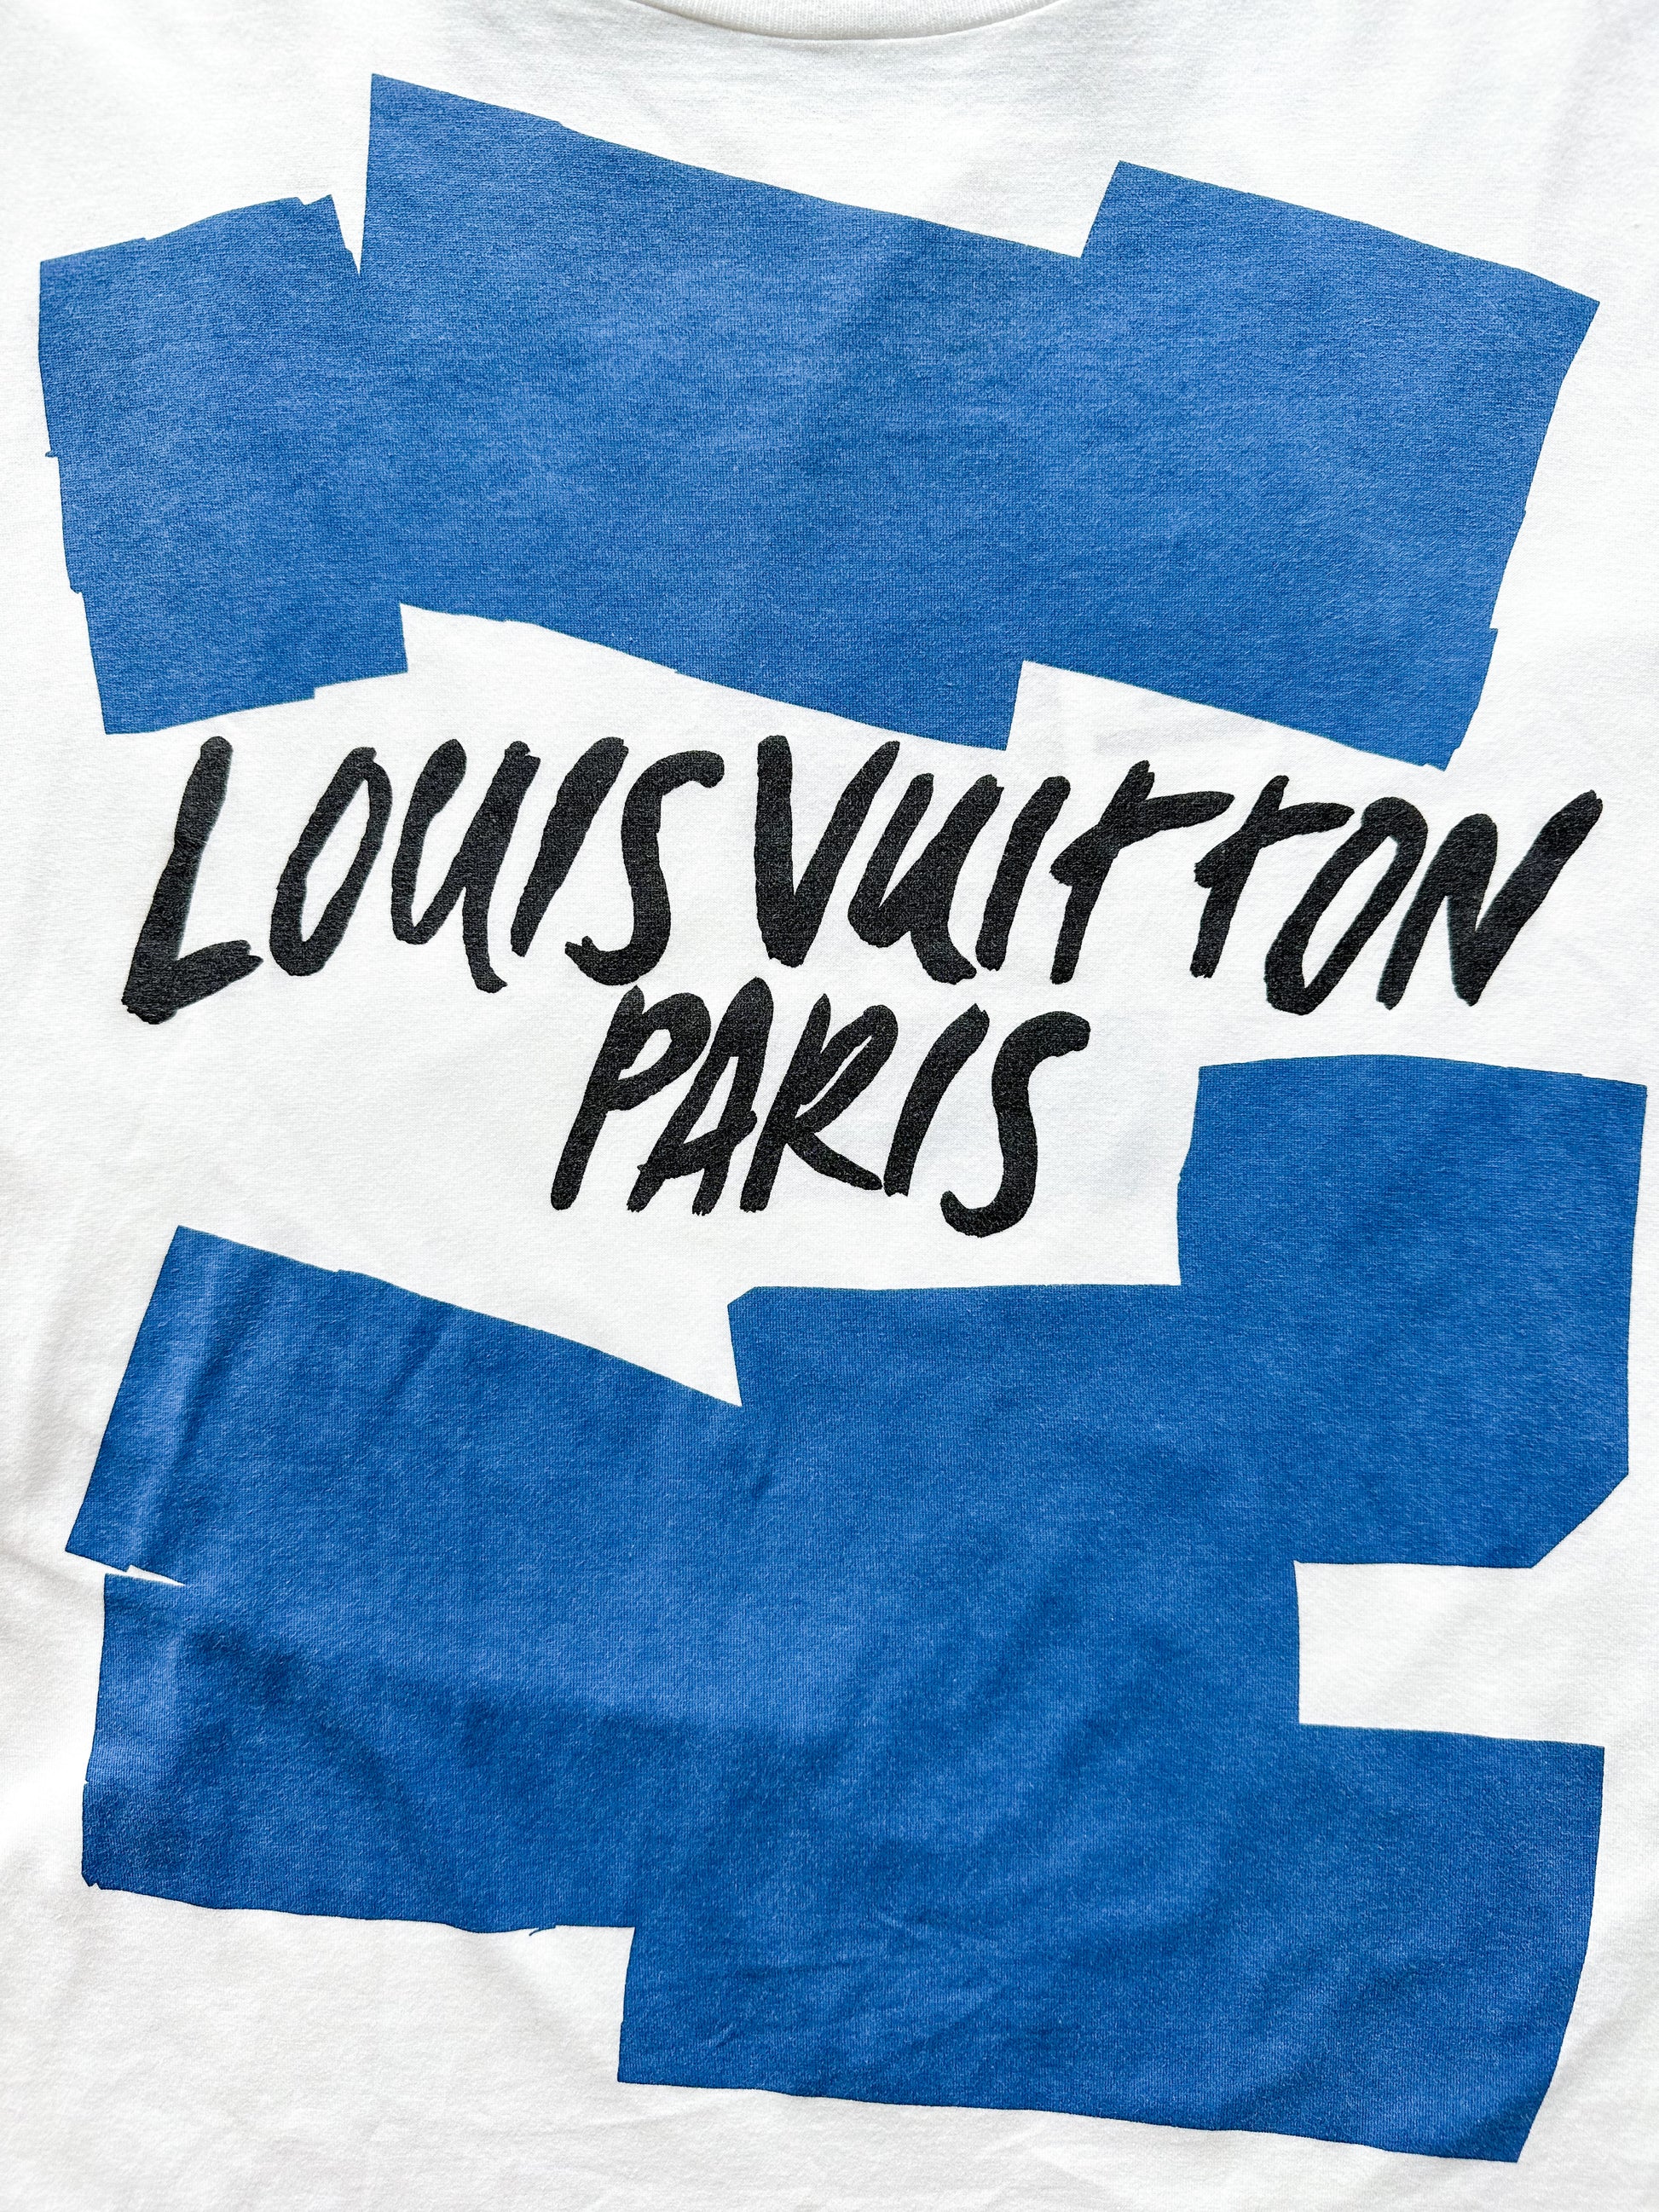 Louis Vuitton malletier paris 1854 t-shirt in blue PRE-OWNED, Men's  Fashion, Tops & Sets, Formal Shirts on Carousell